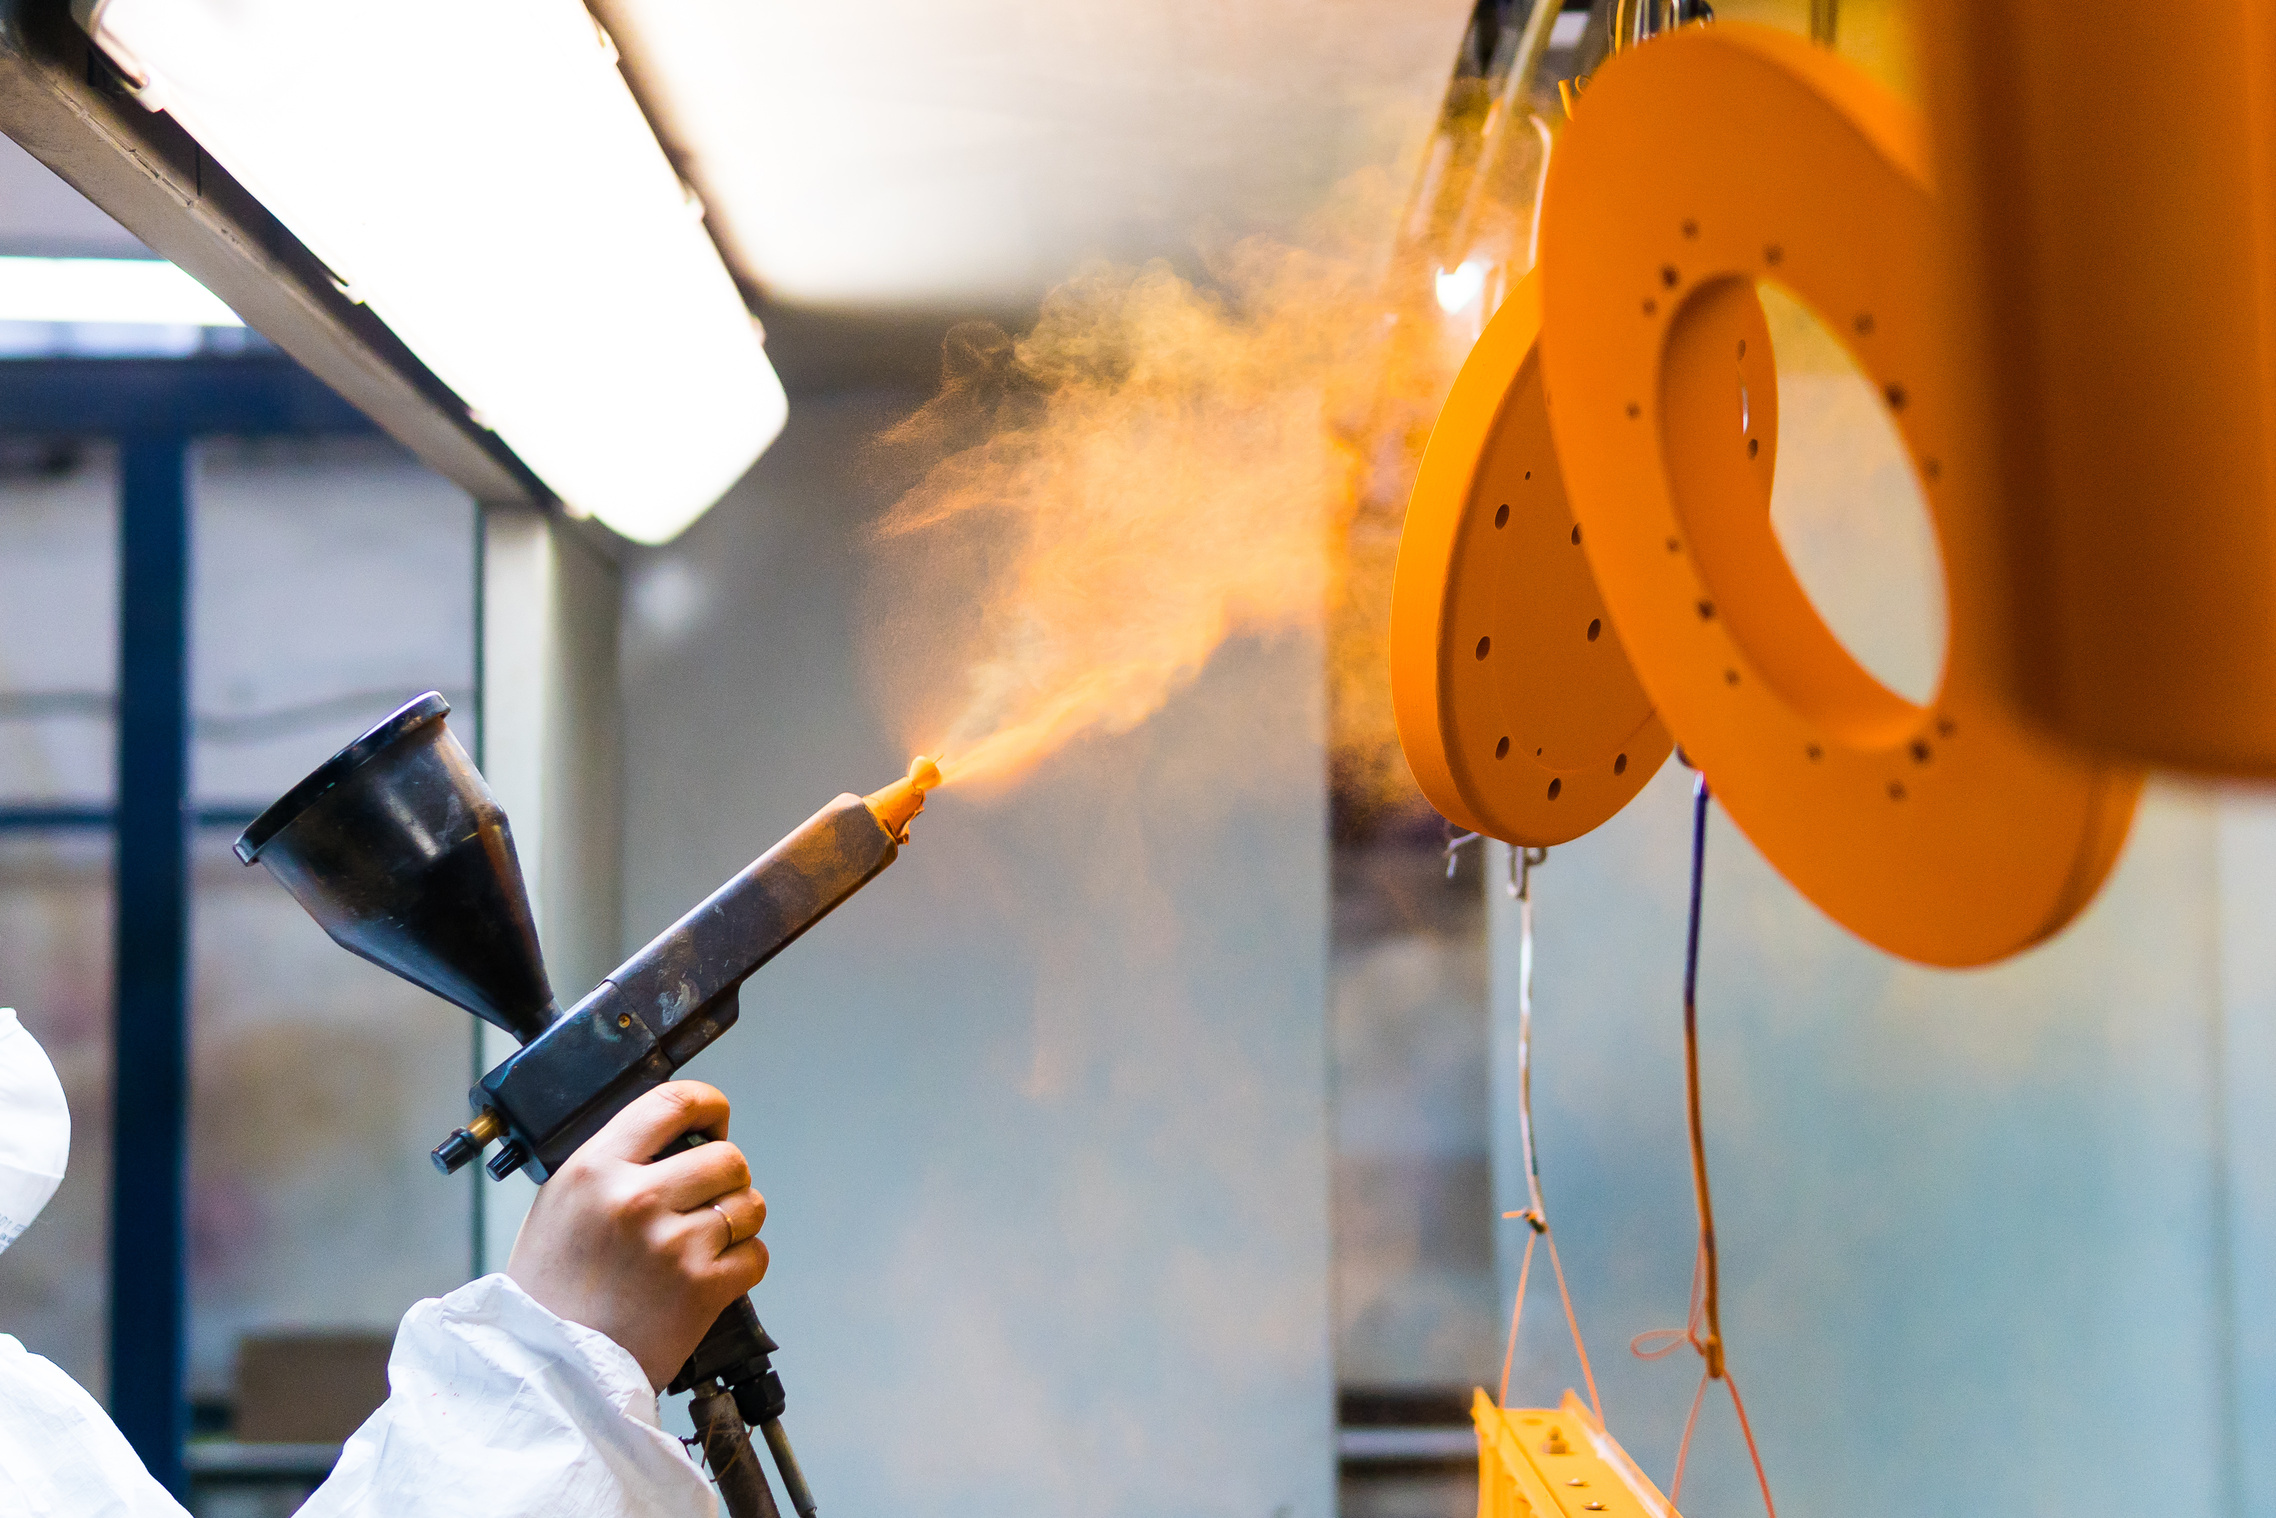 Powder coating of metal parts. A woman in a protective suit sprays powder paint from a gun on industrial equipment